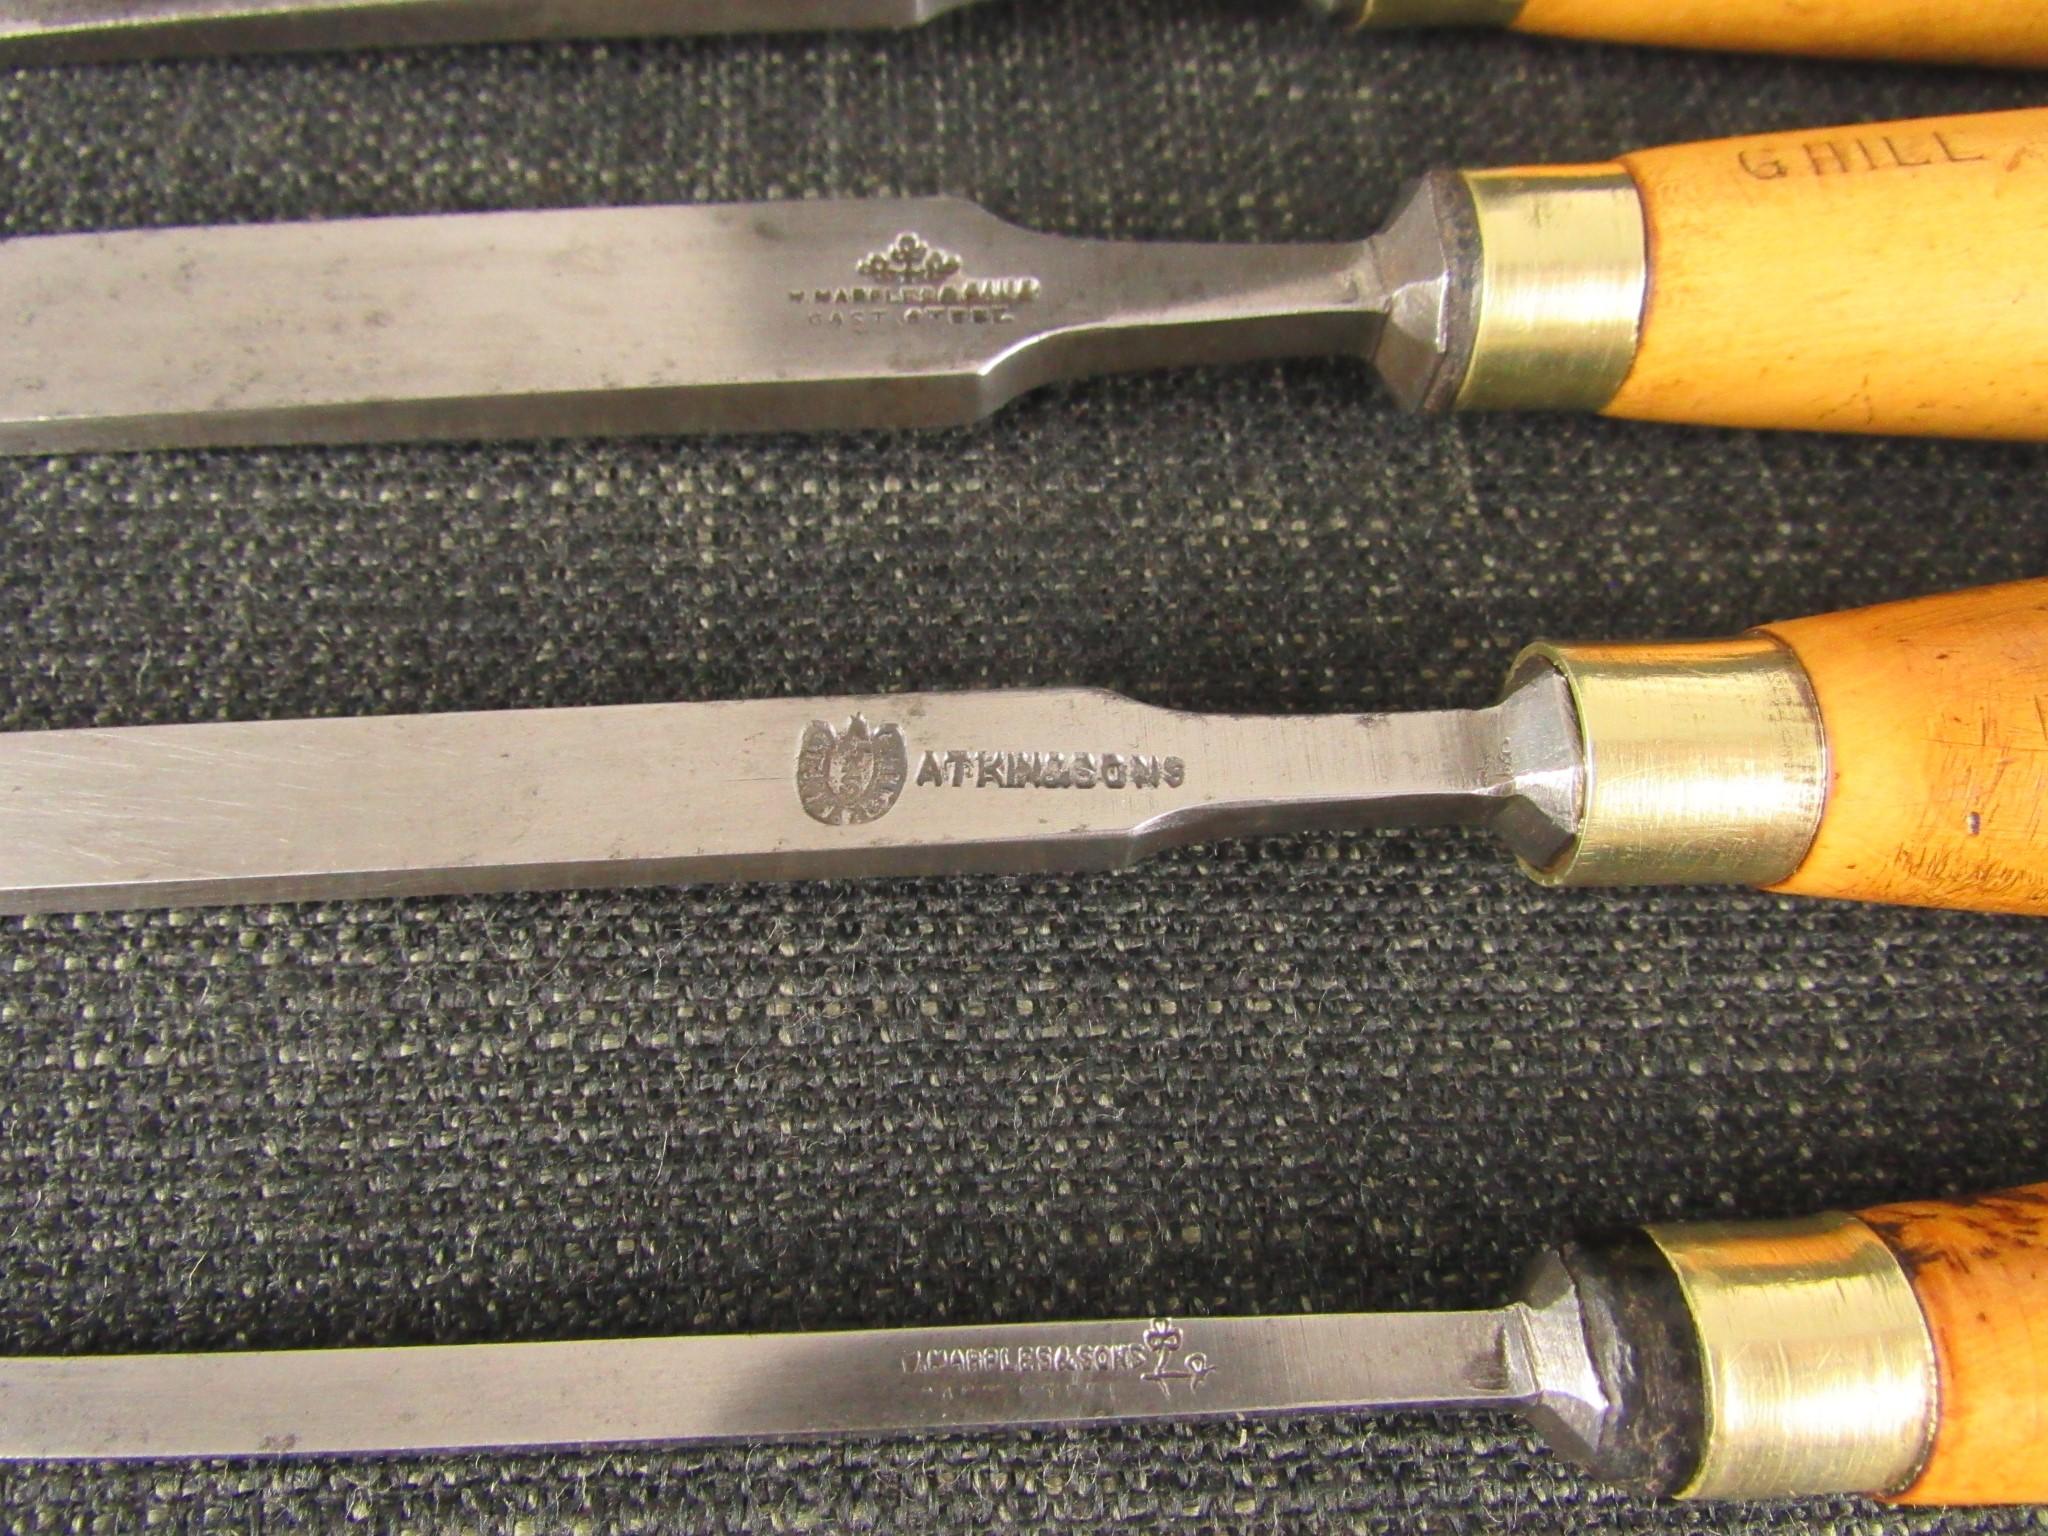 Set of 5 Firmer Chisels with Boxwood Handles